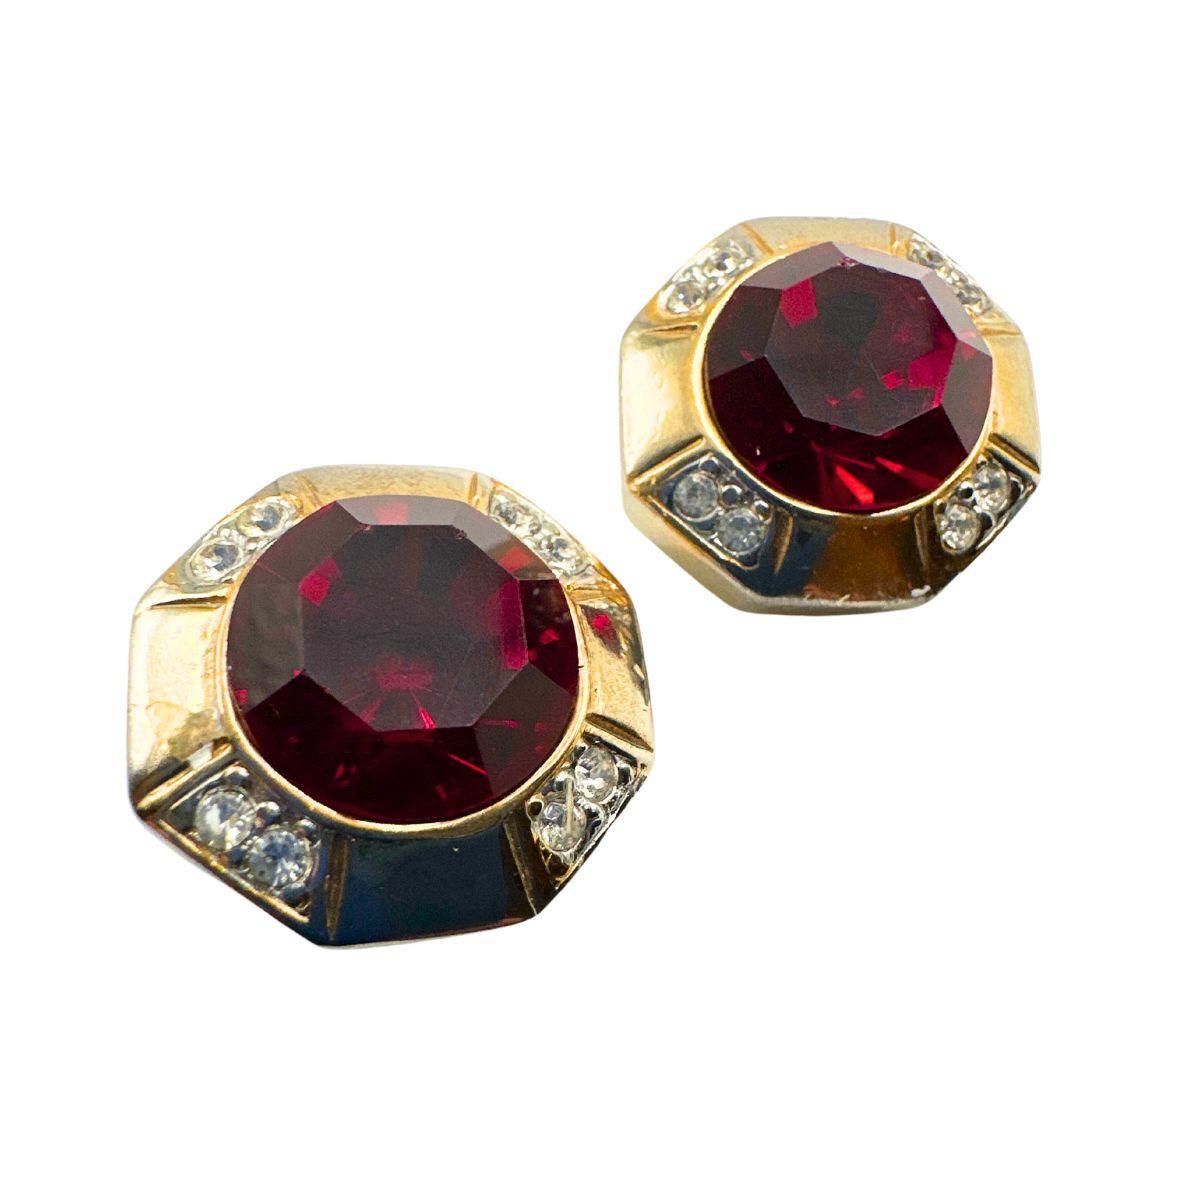 Earring Diameter: 0.87

Bin Code: E11 / P2

Make a stunning statement with this Vintage Austrian Red Cut Glass Earring. Crafted with precision and attention to detail, these earrings exude timeless elegance and capture attention with their